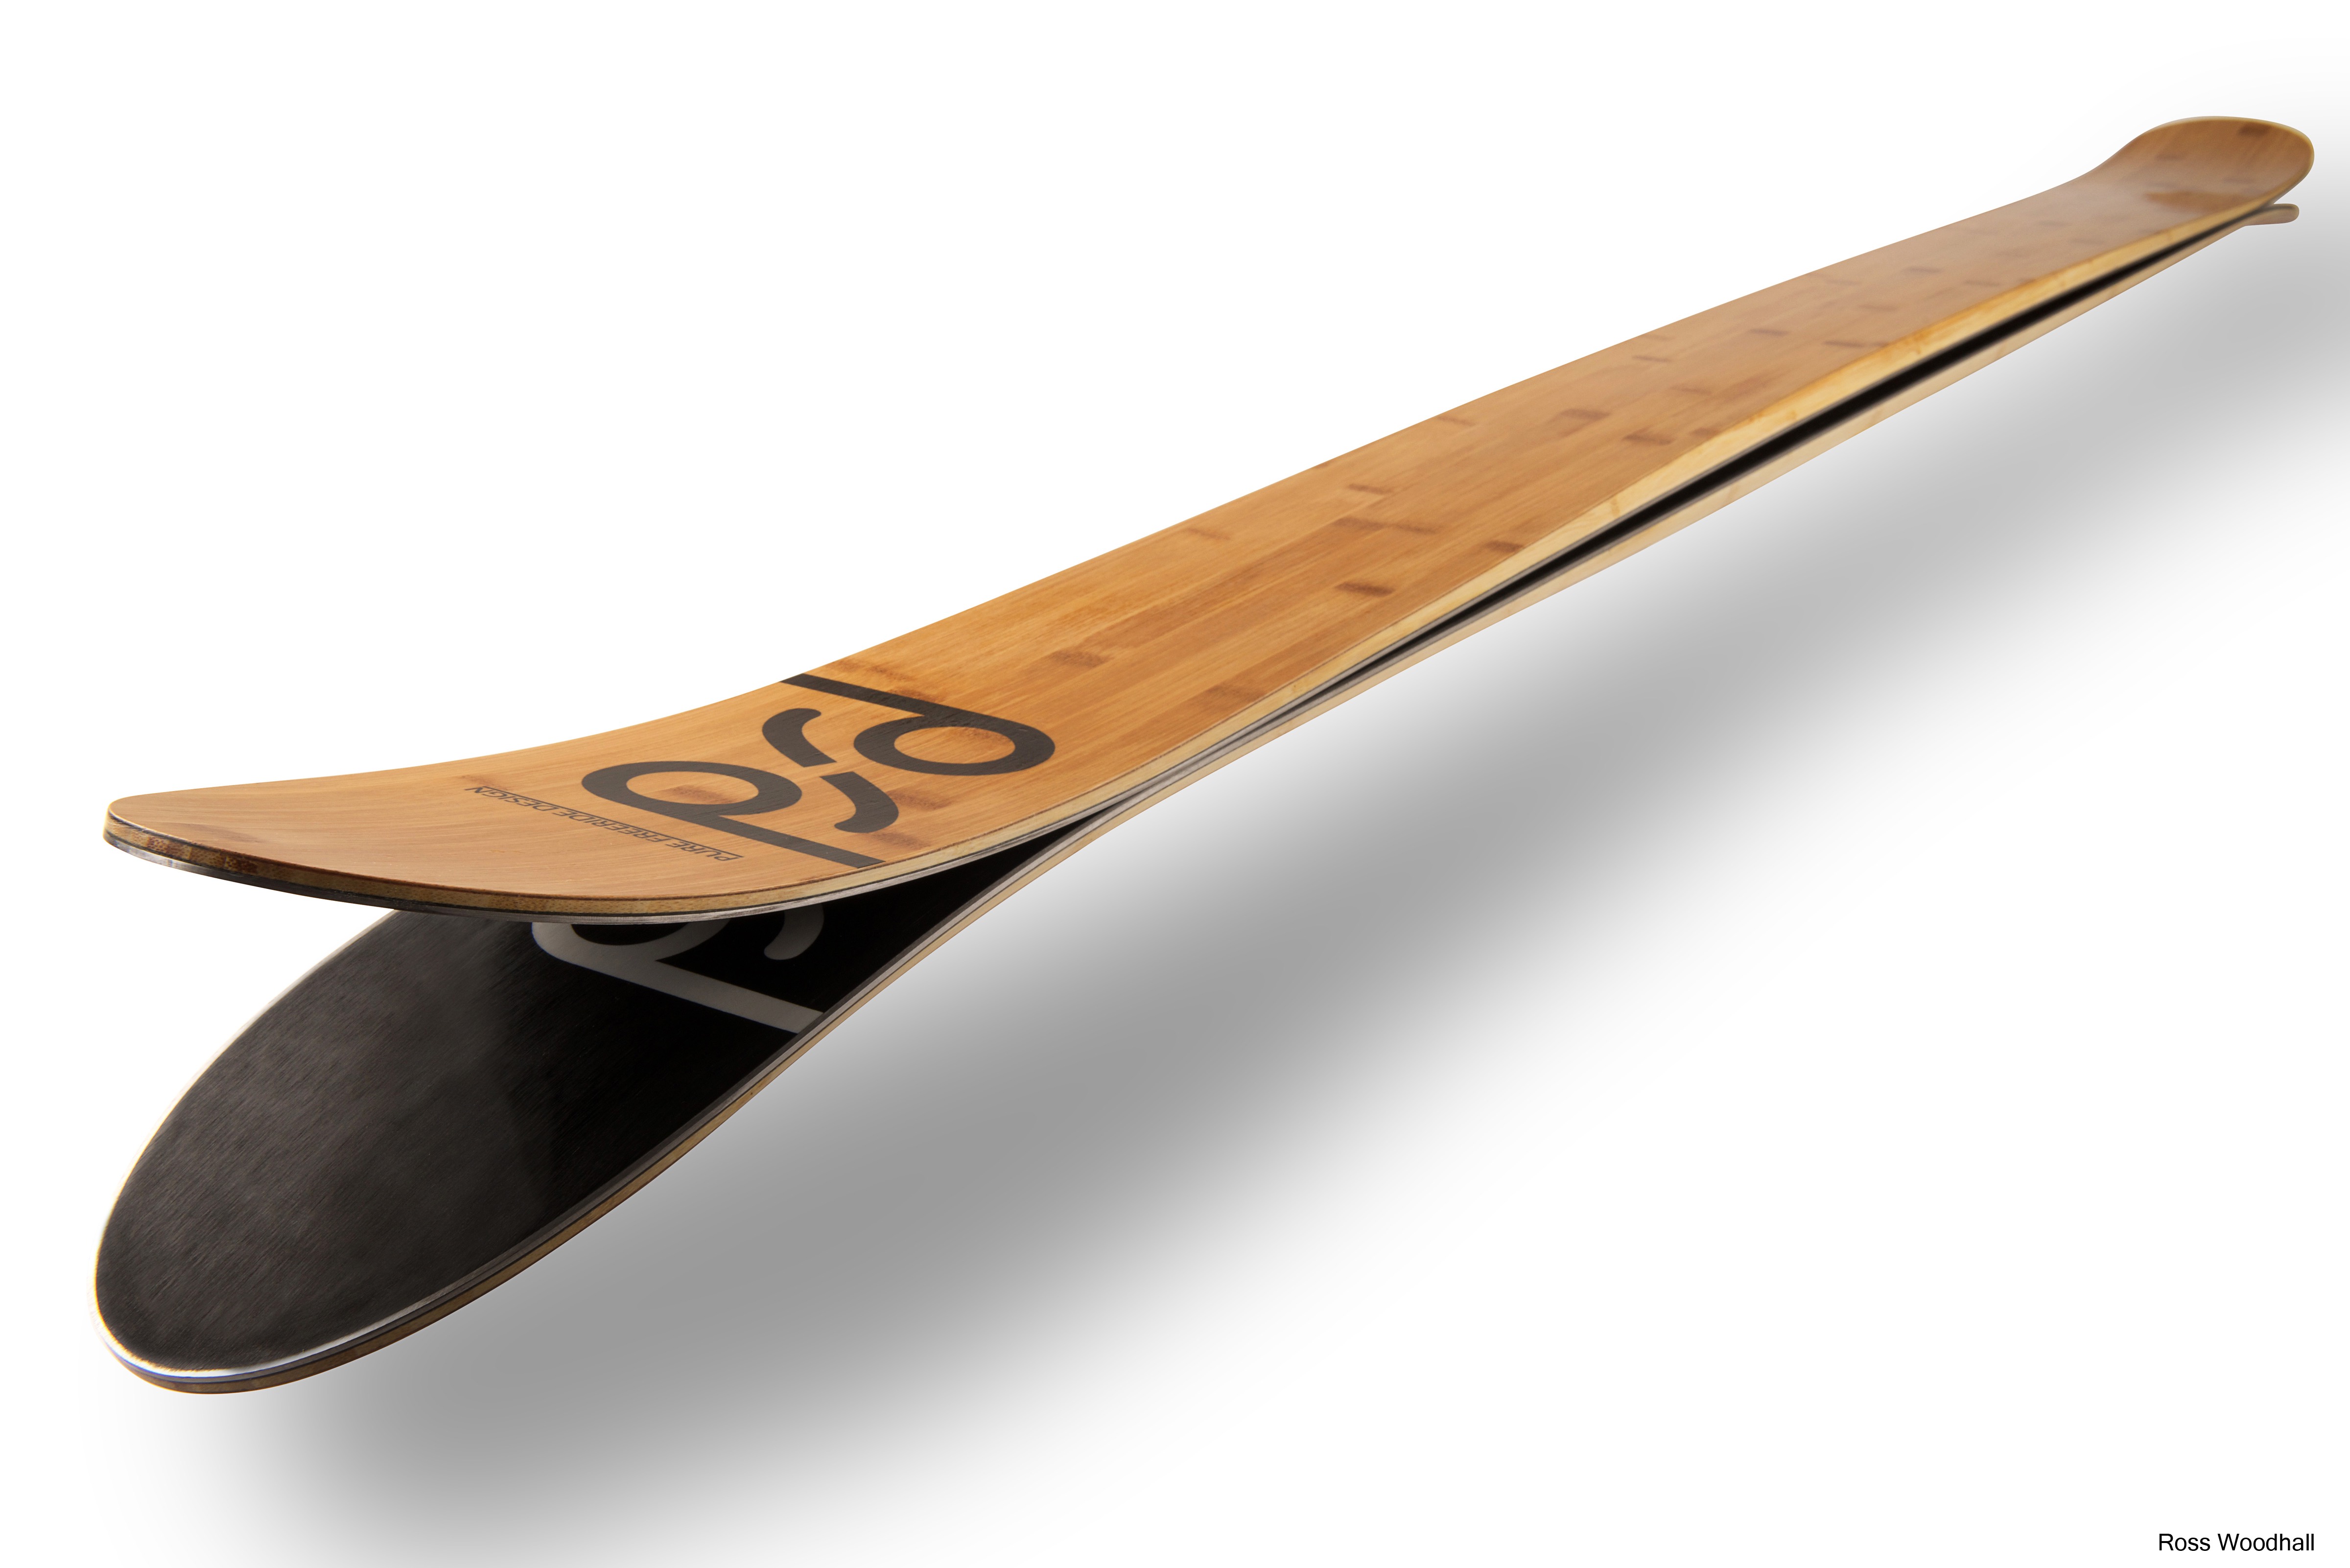 Skis handmade from bamboo plus an amazing video of how they’re made